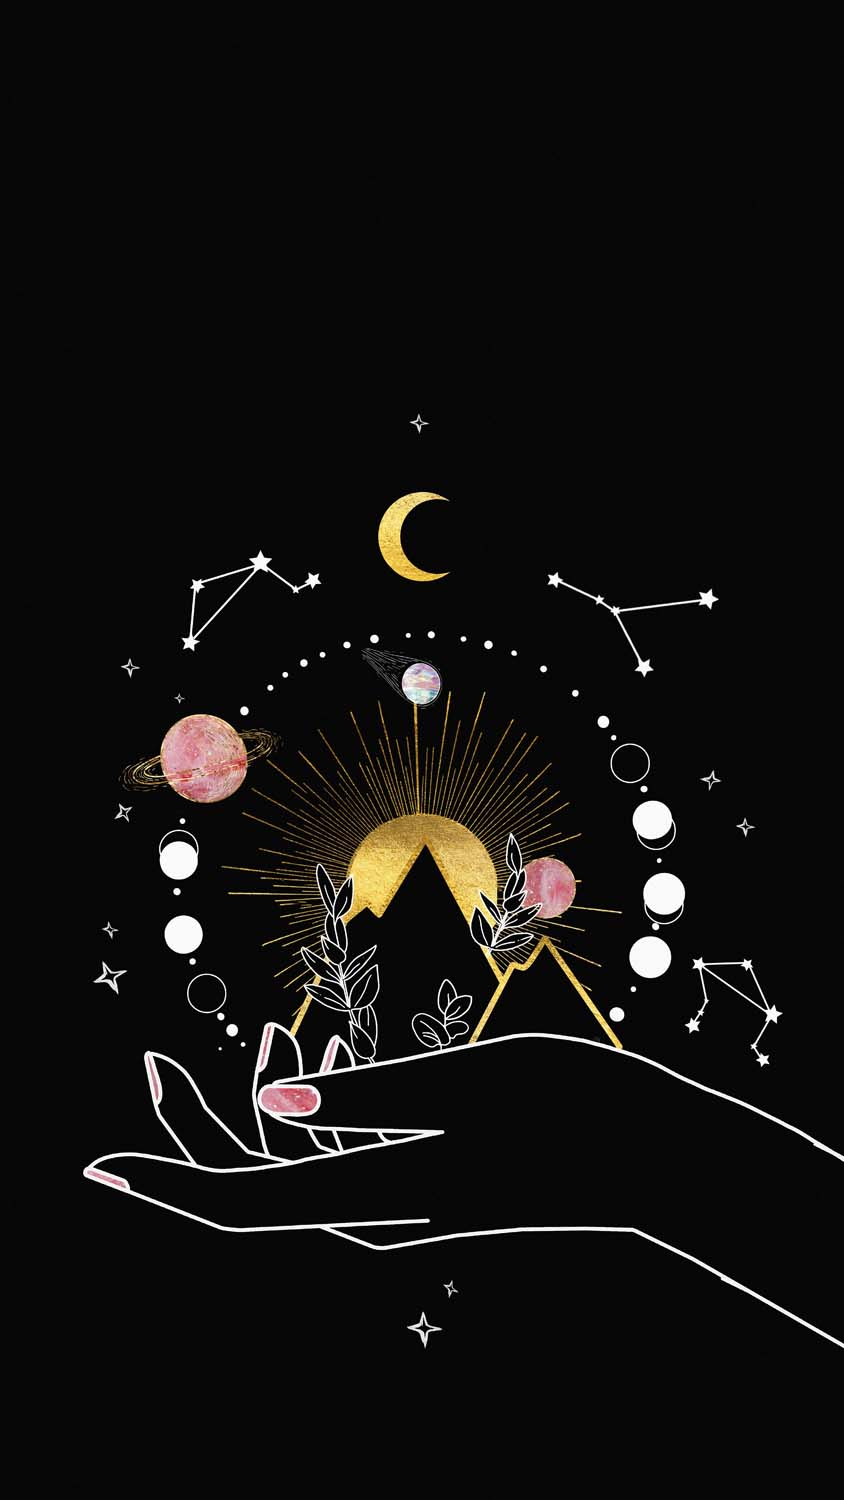 Space Elements IPhone Wallpaper HD  IPhone Wallpapers